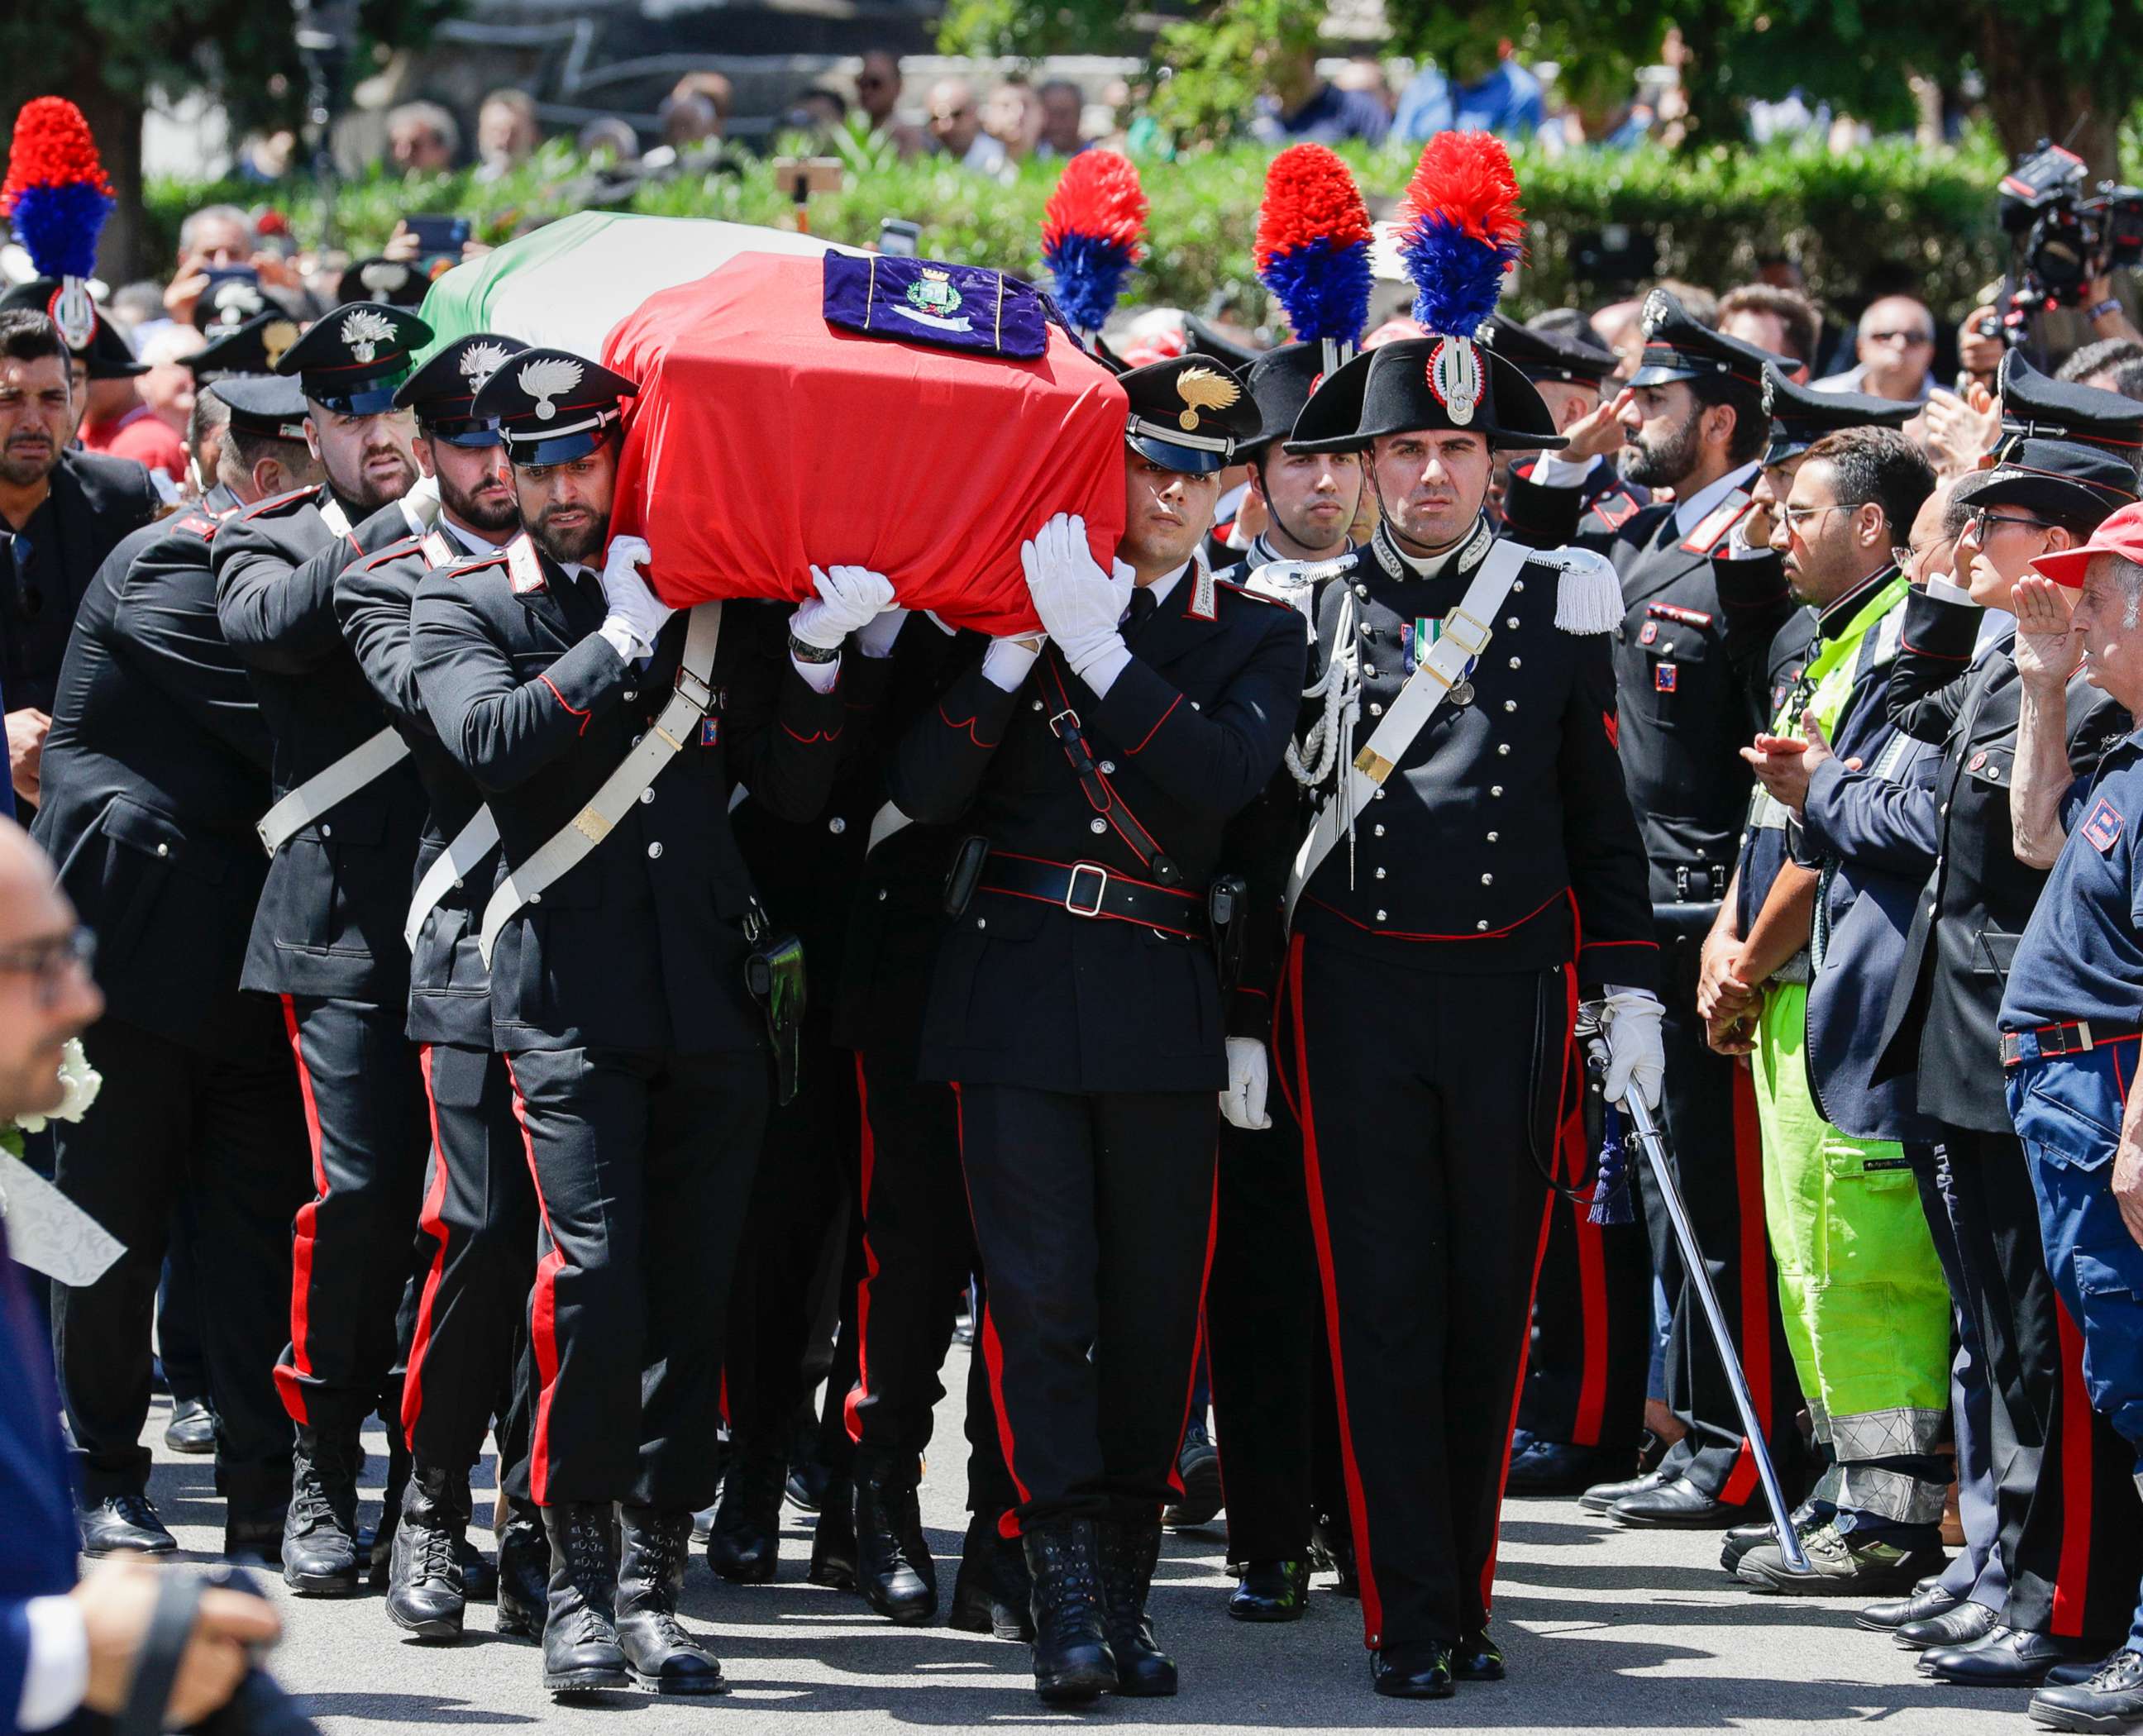 PHOTO: The coffin containing the body of Carabinieri's officer Mario Cerciello Rega is carried to his funeral in his hometown of Somma Vesuviana, near Naples, Italy, July 29, 2019.